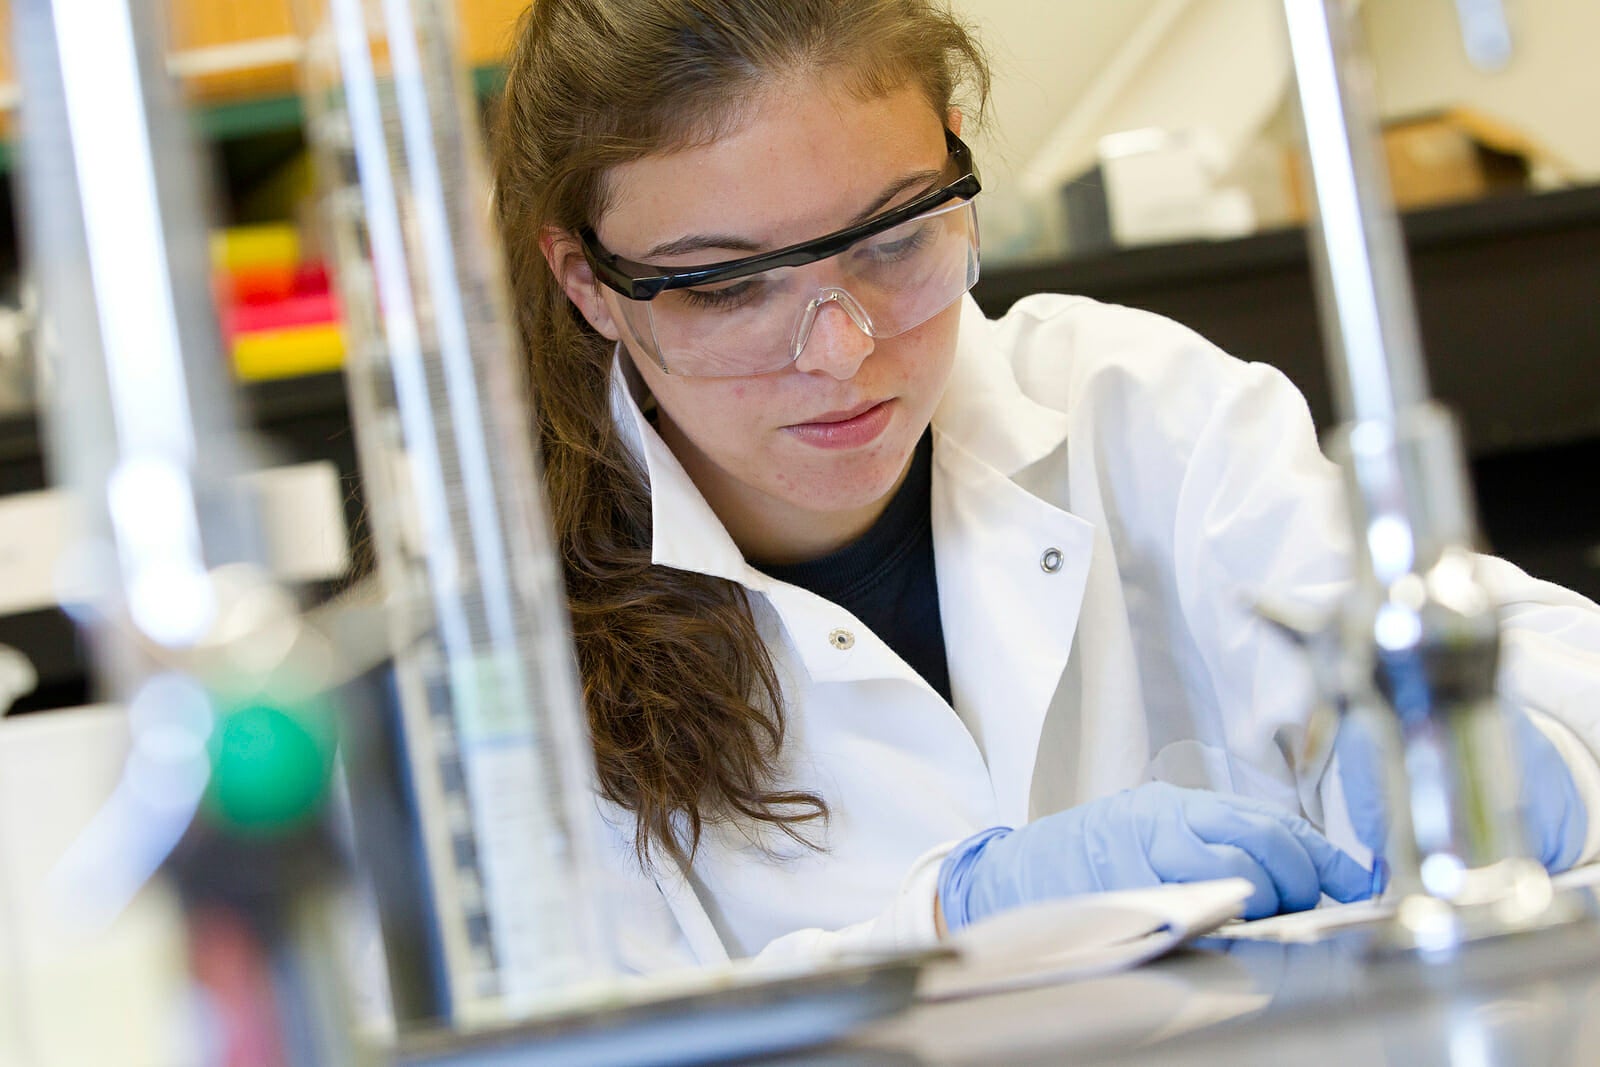 Student wearing lab glasses and lab coat working on task in lab